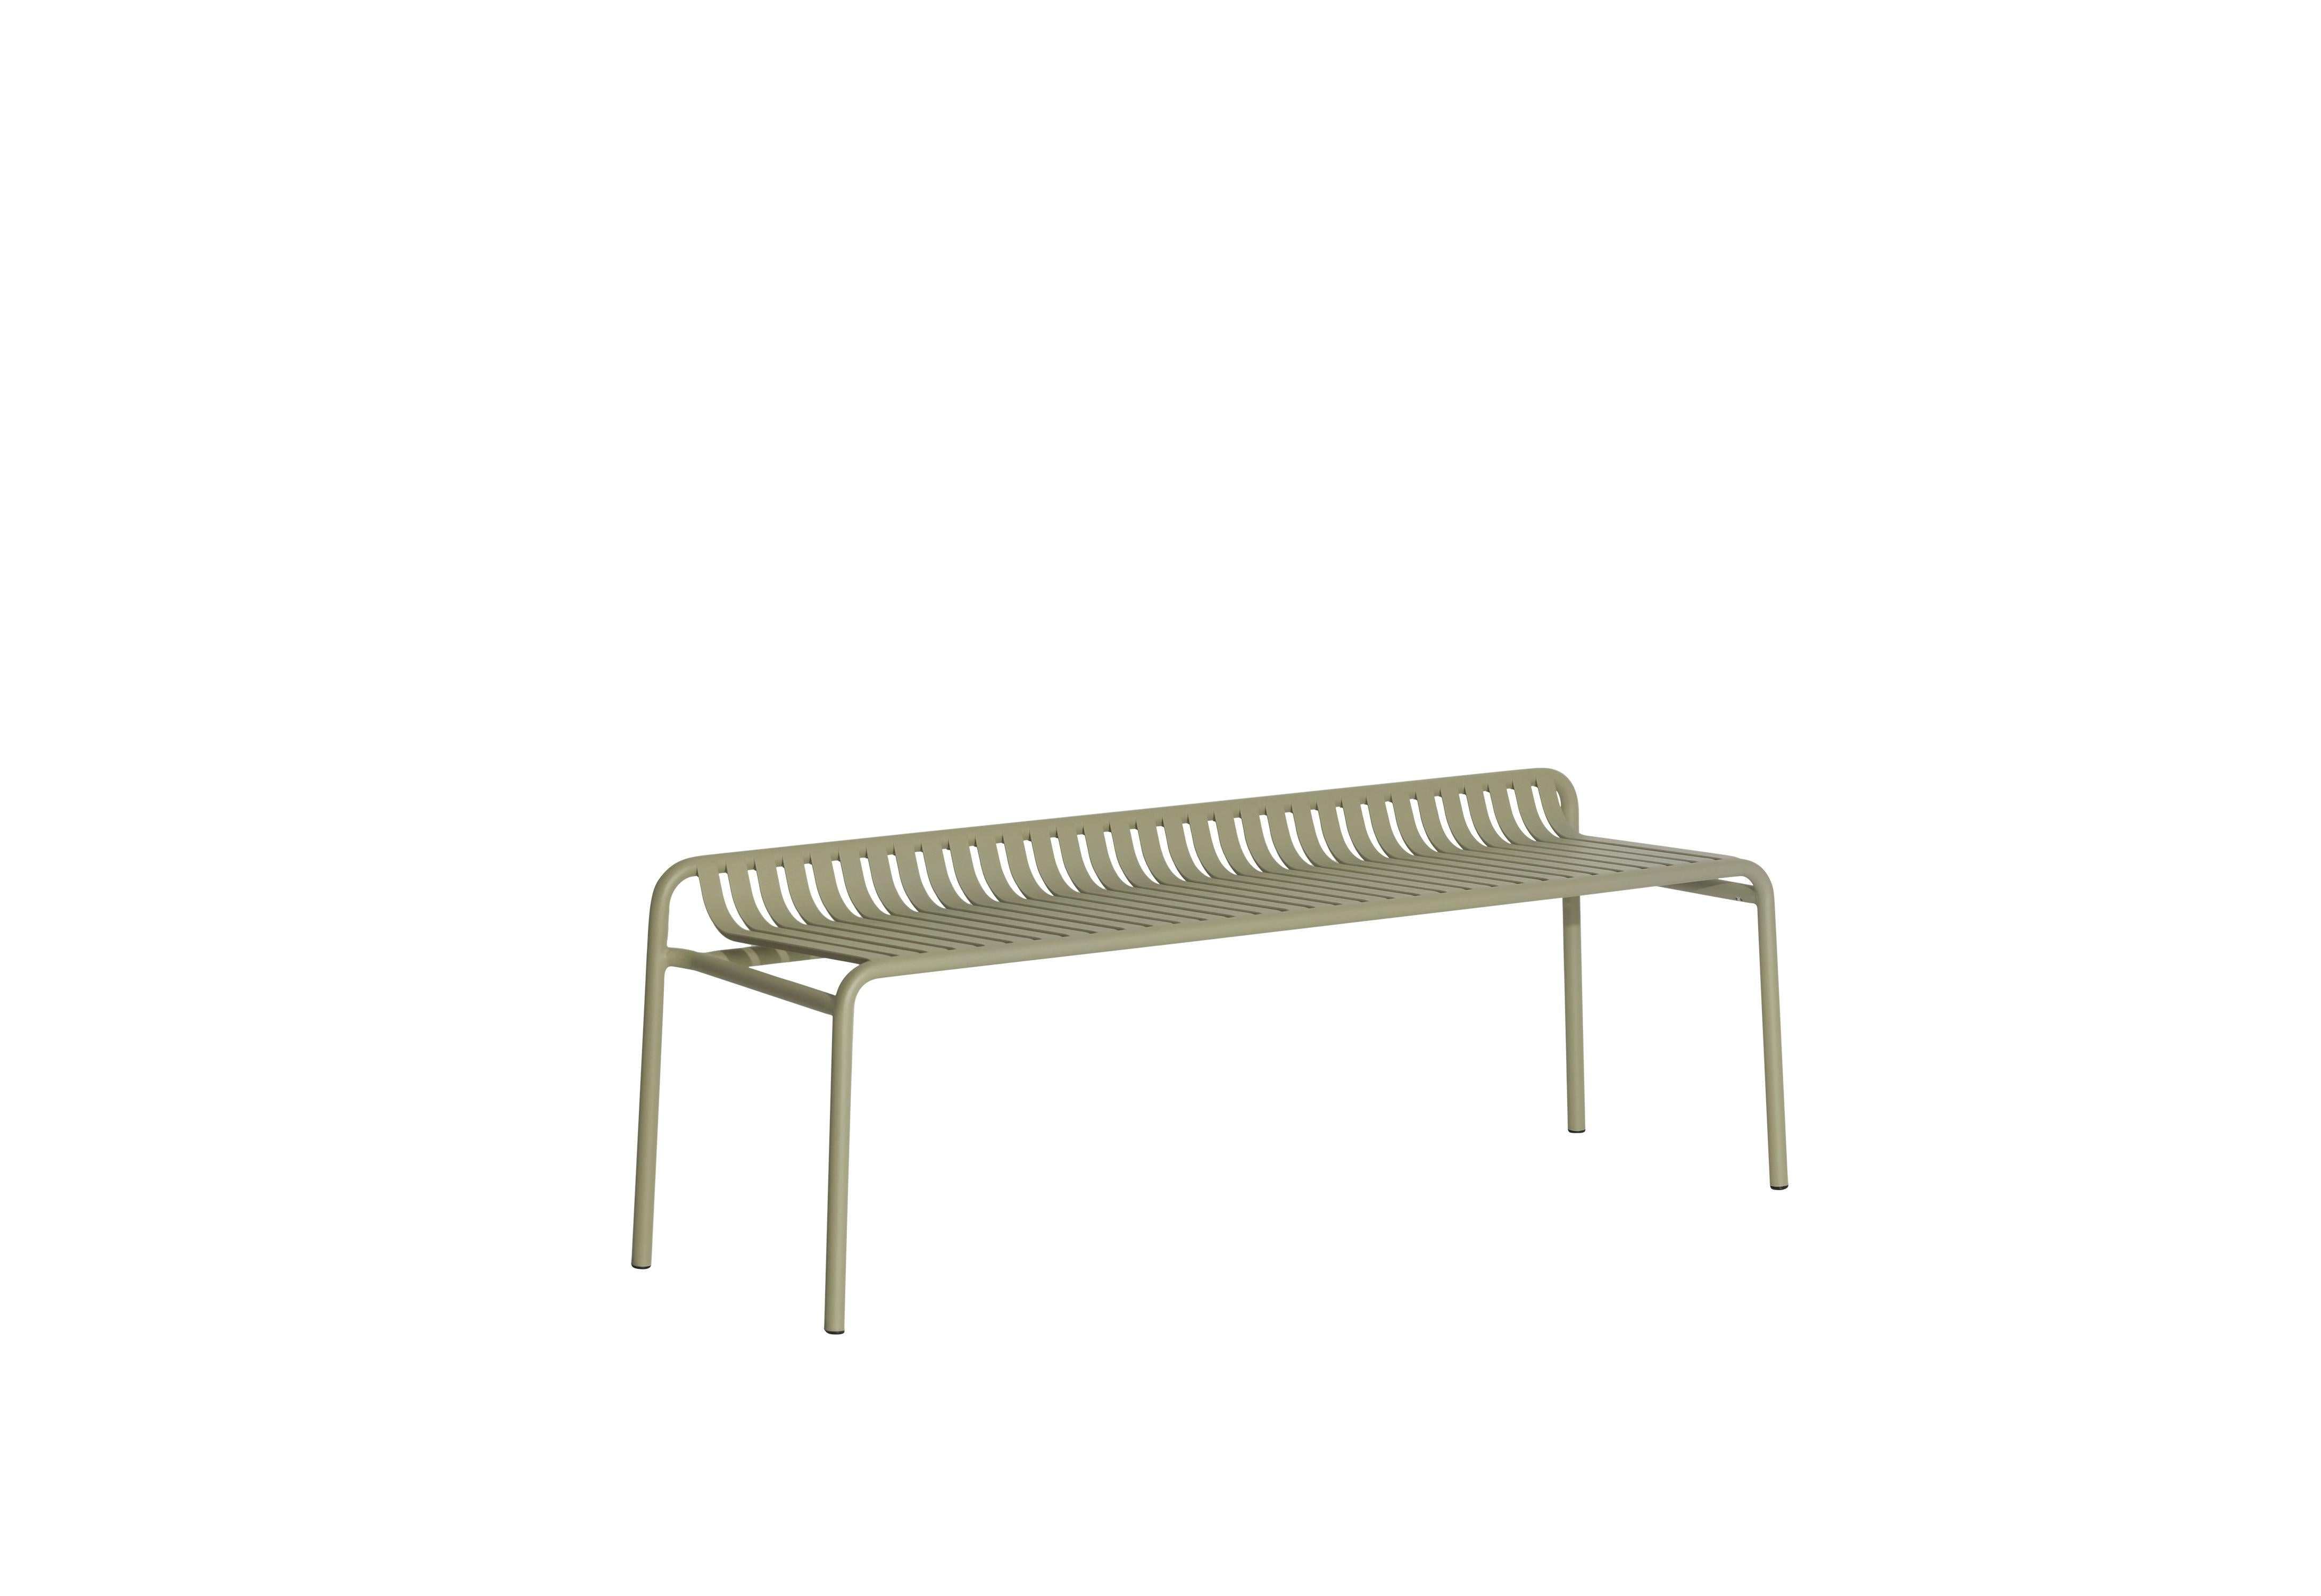 Petite Friture Week-End Bench without Back in Jade Green Aluminium by Studio BrichetZiegler, 2017

The week-end collection is a full range of outdoor furniture, in aluminium grained epoxy paint, matt finish, that includes 18 functions and 8